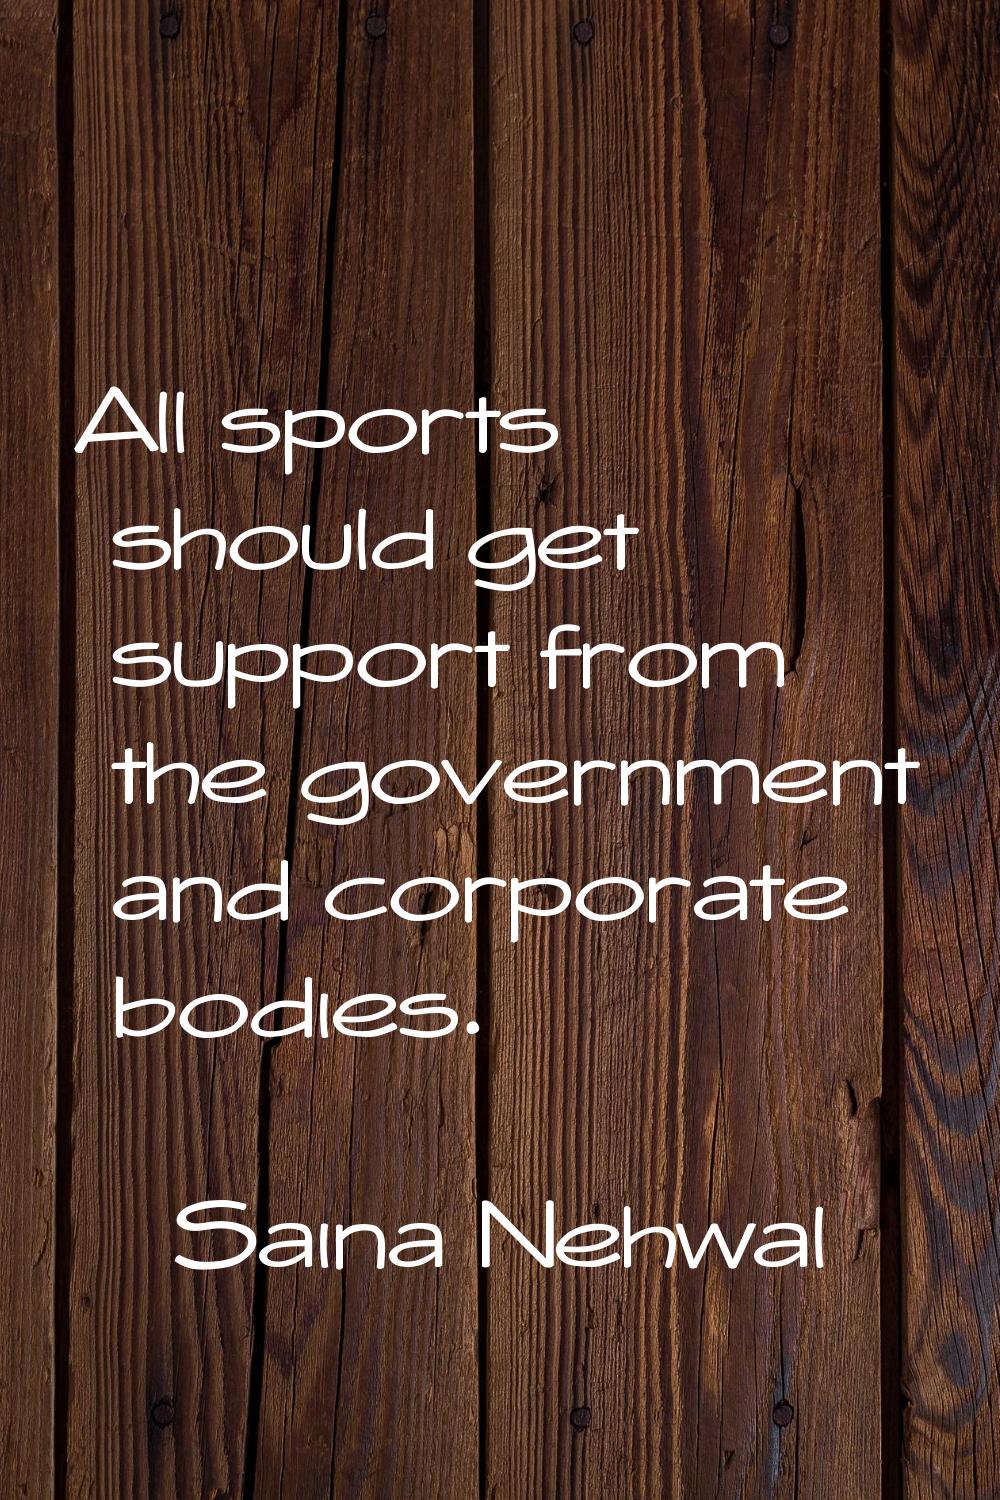 All sports should get support from the government and corporate bodies.